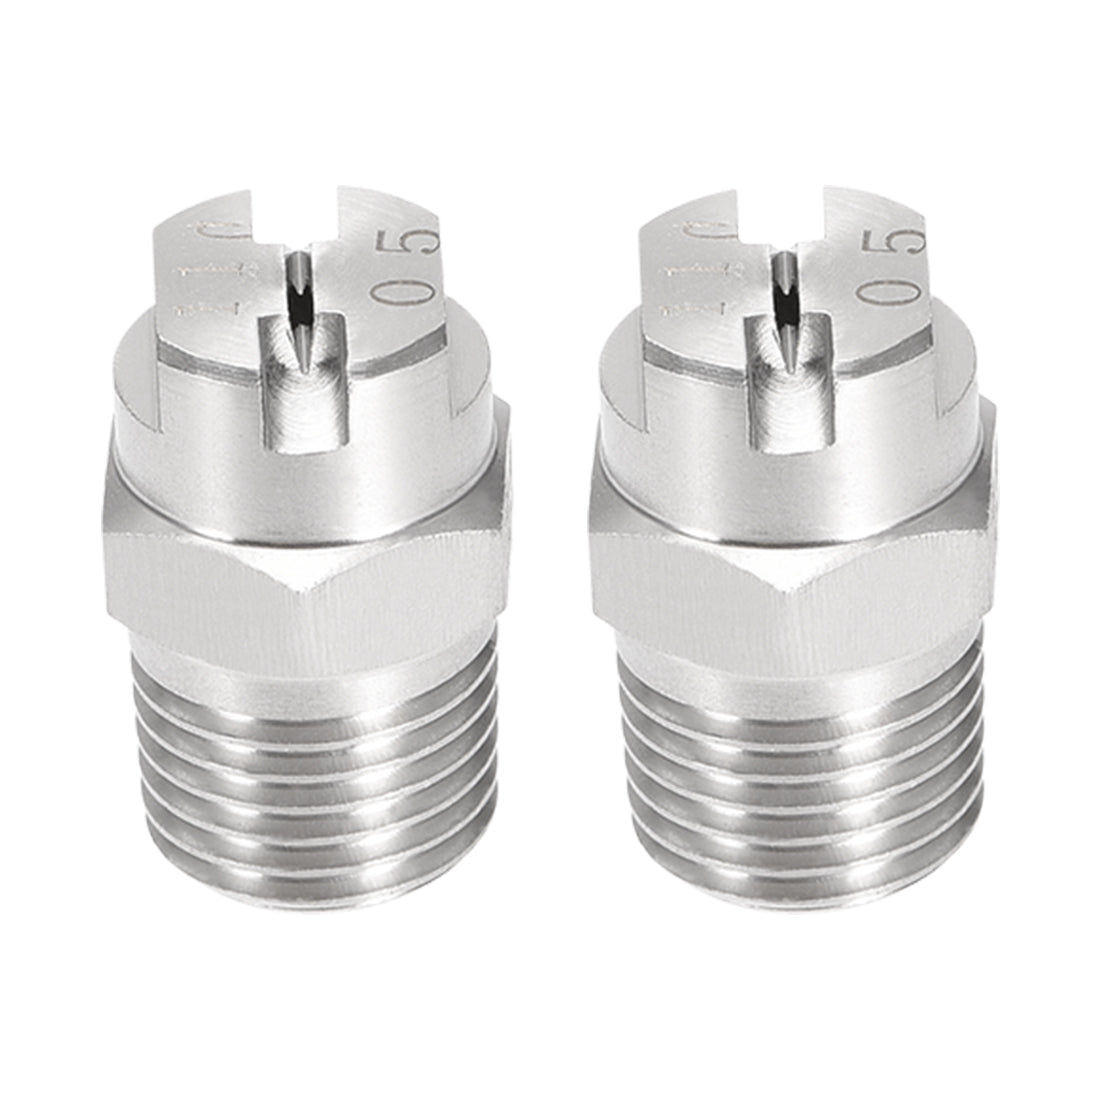 Uxcell Uxcell Flat Fan Spray Tip - 1/4BSPT Male Thread 304 Stainless Steel Nozzle - 110 Degree 1.8mm Orifice Diameter - 2 Pcs